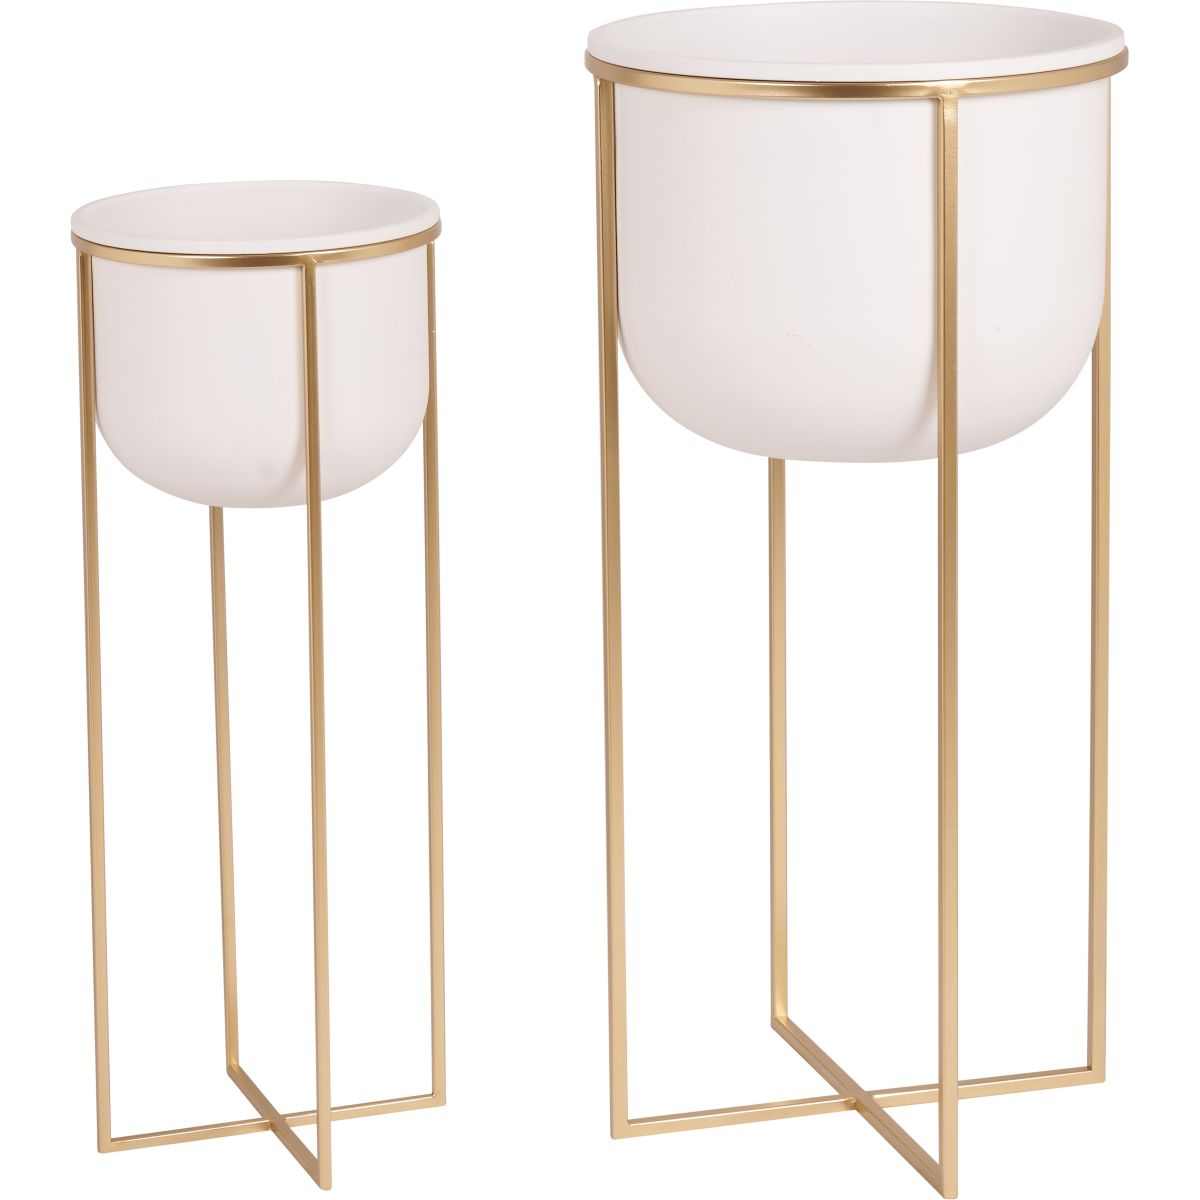 S/2 White and Gold Metal Planters